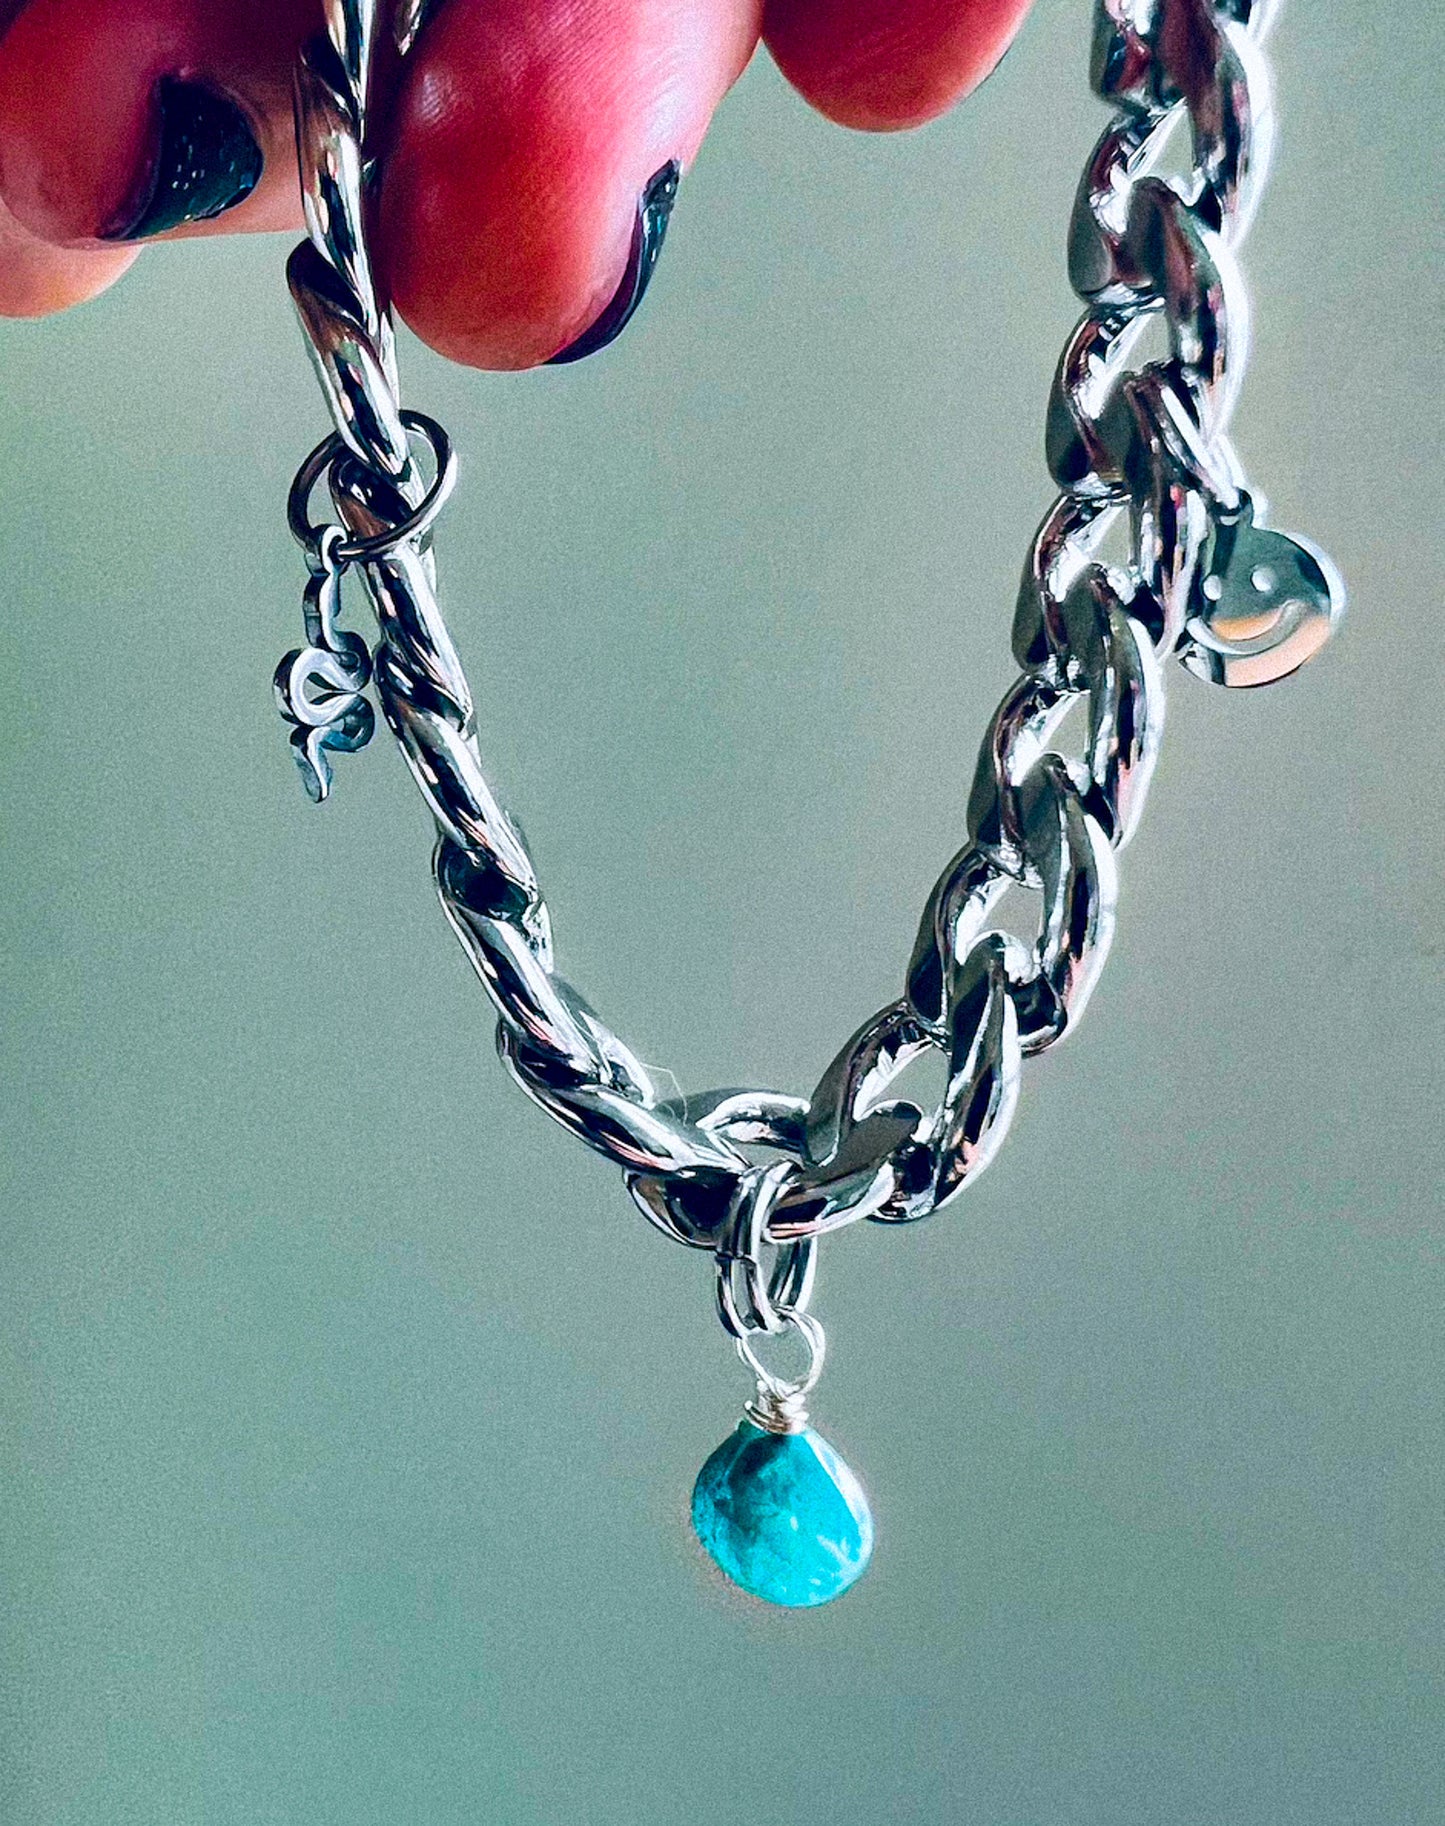 'Trust Your Inner Guidance’ Blue Moonstone, Lil Smiley Face, Lil Snake Silver Plated Brass Cuban Chain Charm Bracelet